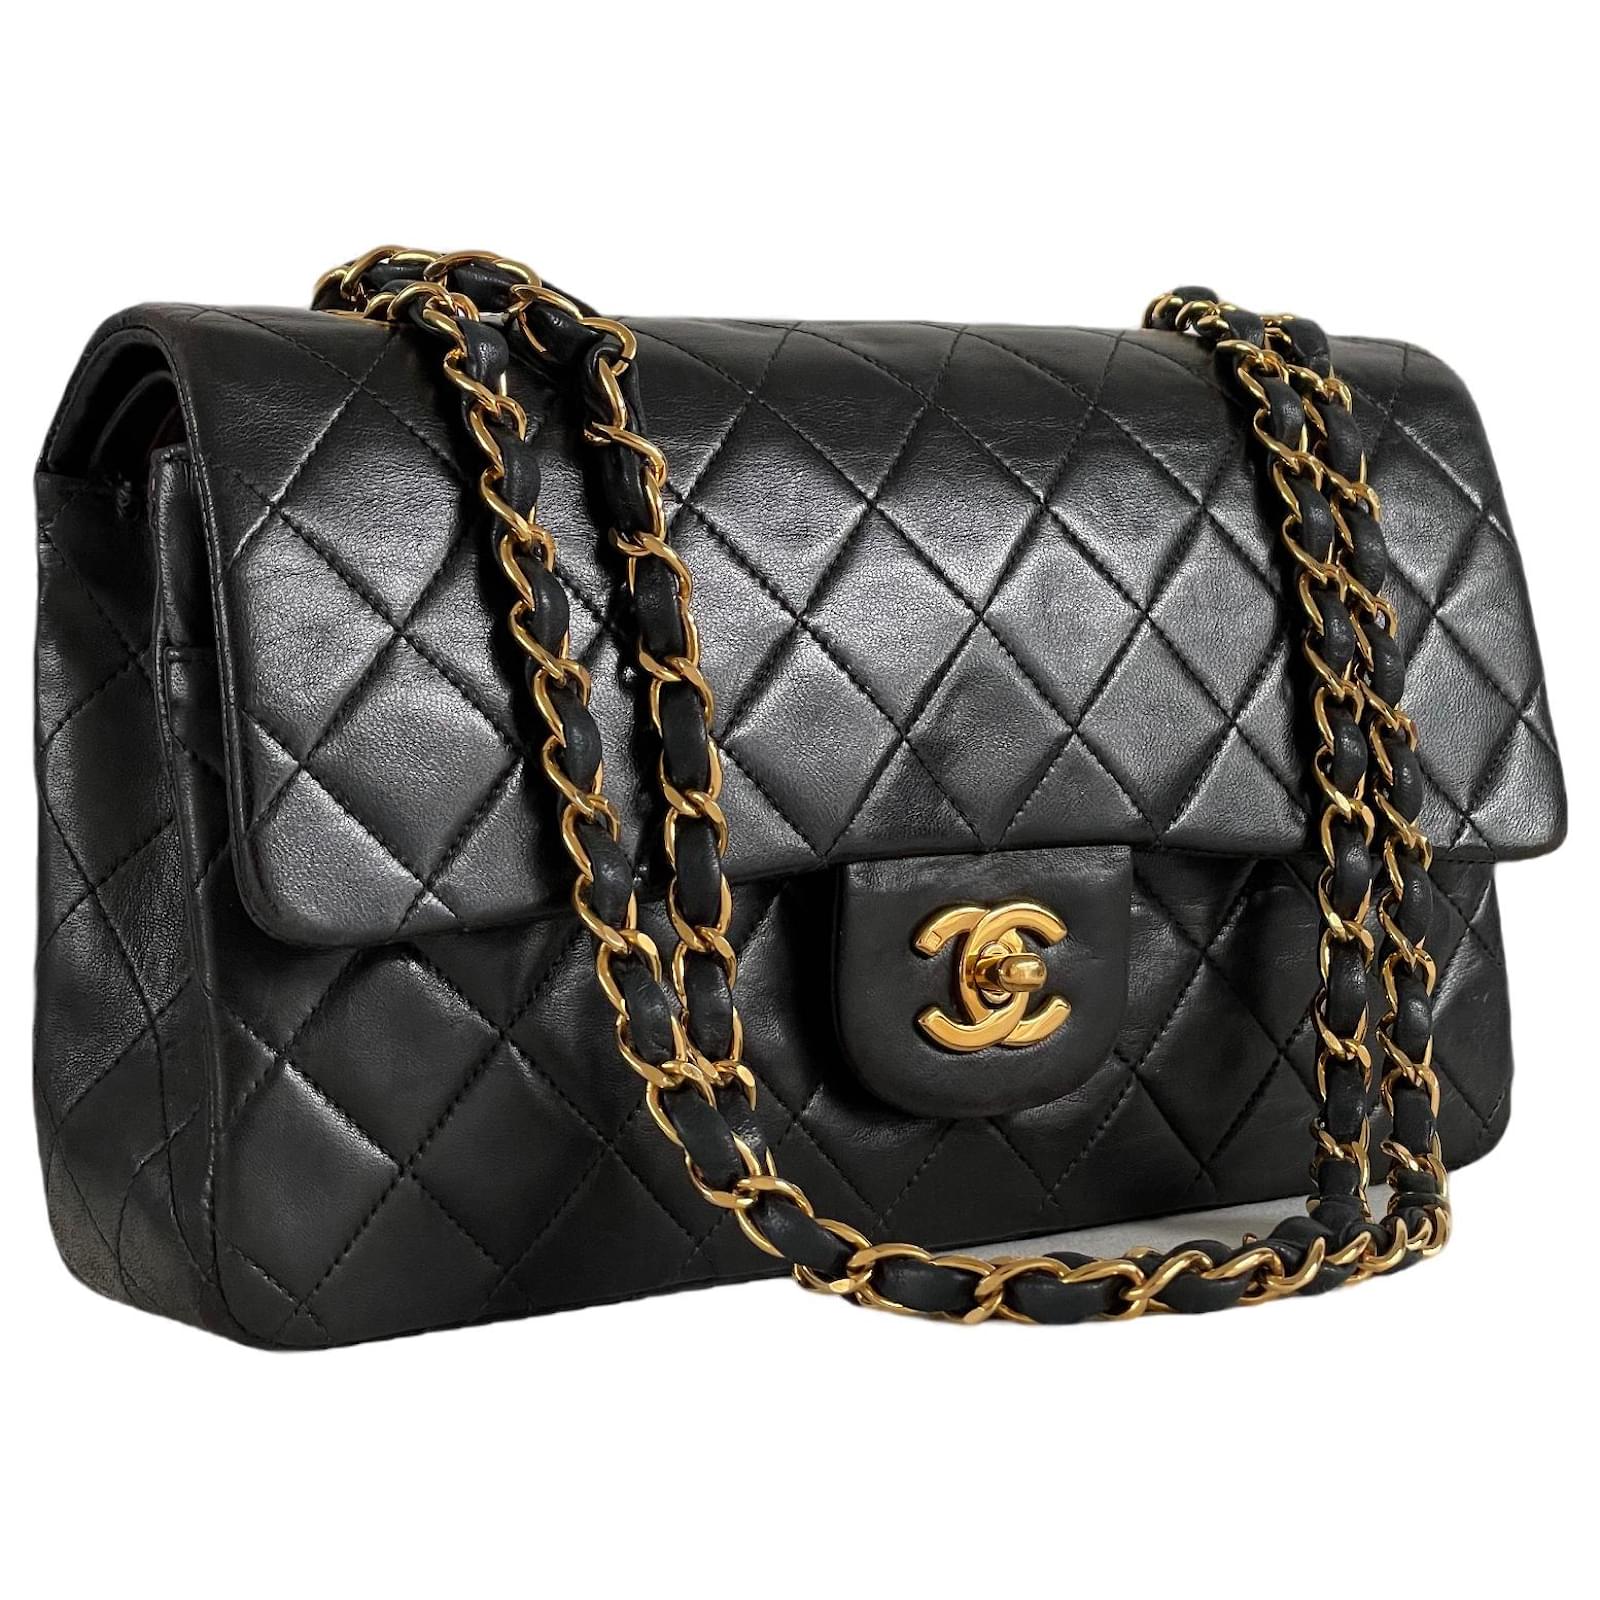 Chanel lined flap classic timeless GHW gold hardware 24K crossbody